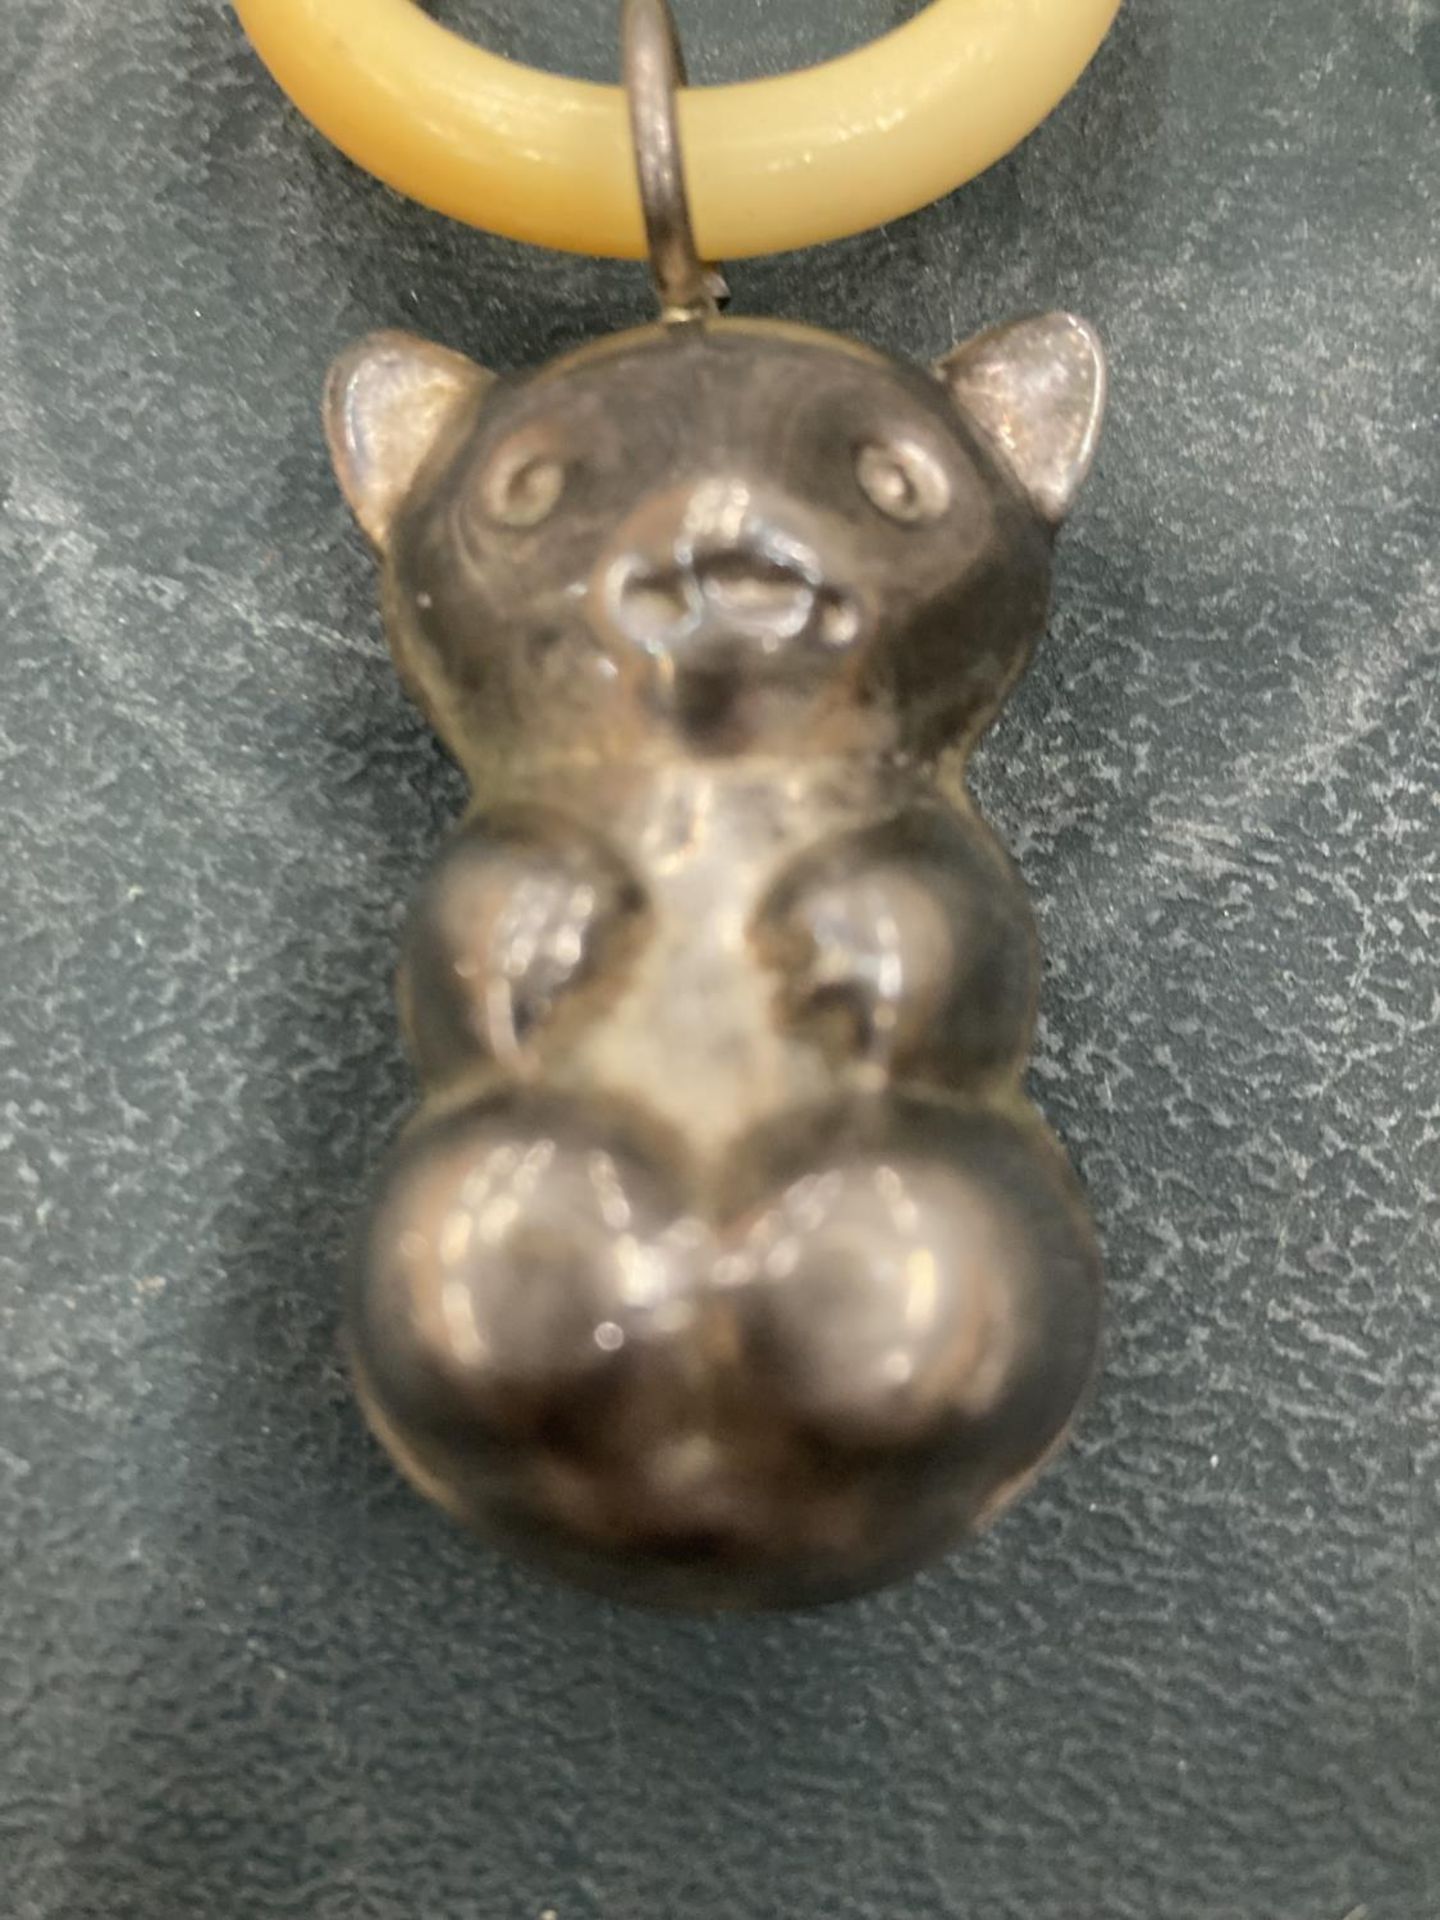 AN EARLY 20TH CENTURY TEETHING RING WITH TEDDY BEAR CHARM - Image 2 of 3